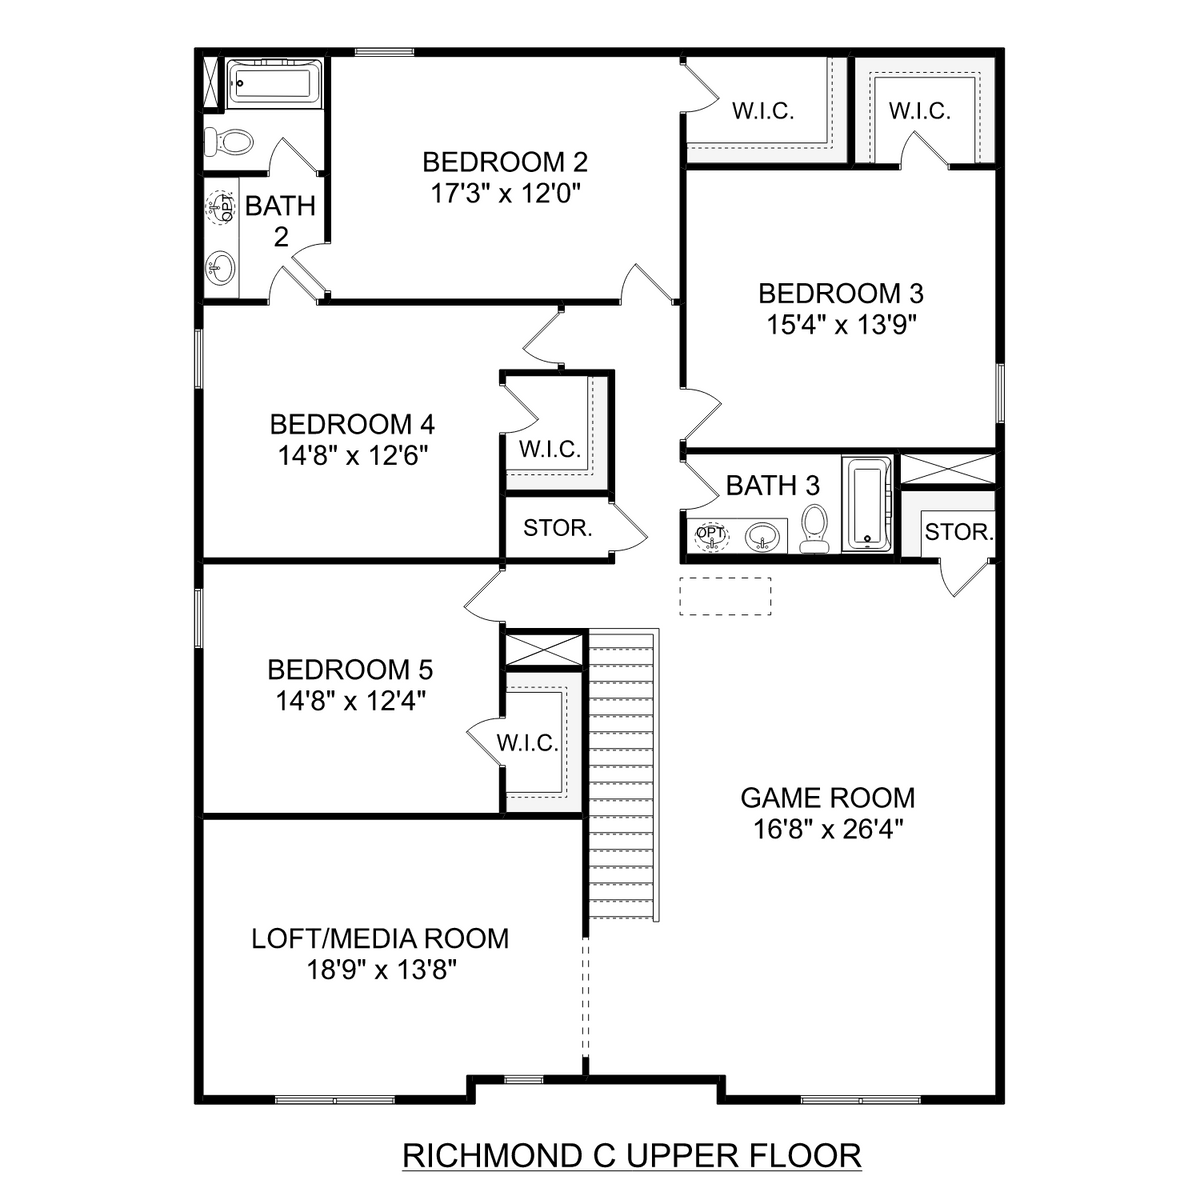 2 - The Richmond C floor plan layout for 133 Fall Meadow Drive in Davidson Homes' Durham Farms community.